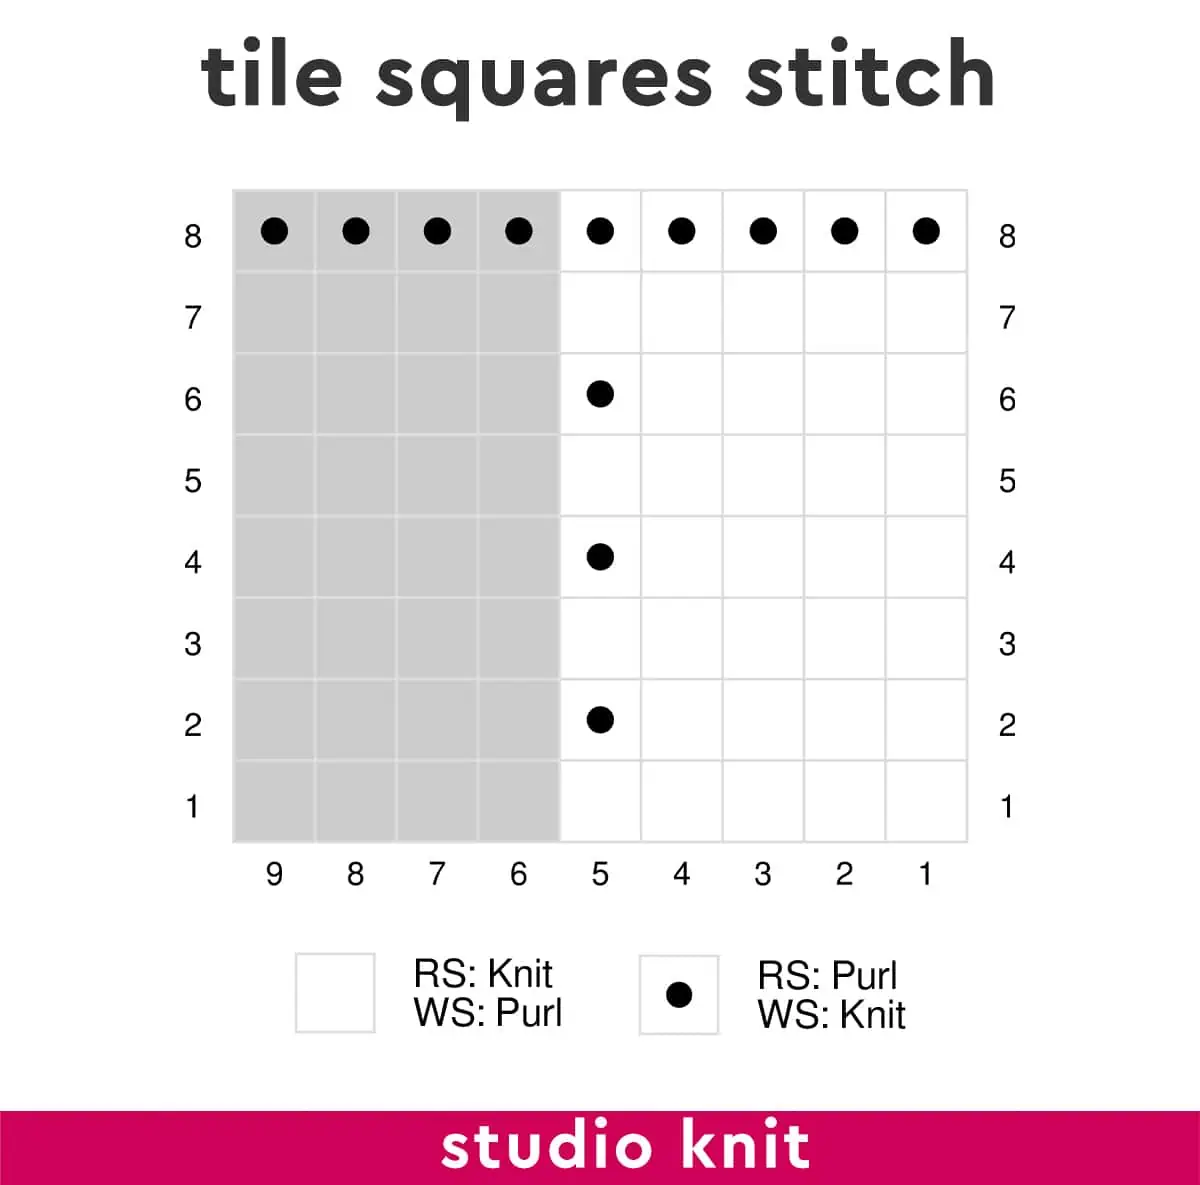 Knitting chart diagram of the Tile Squares Stitch by Studio Knit.